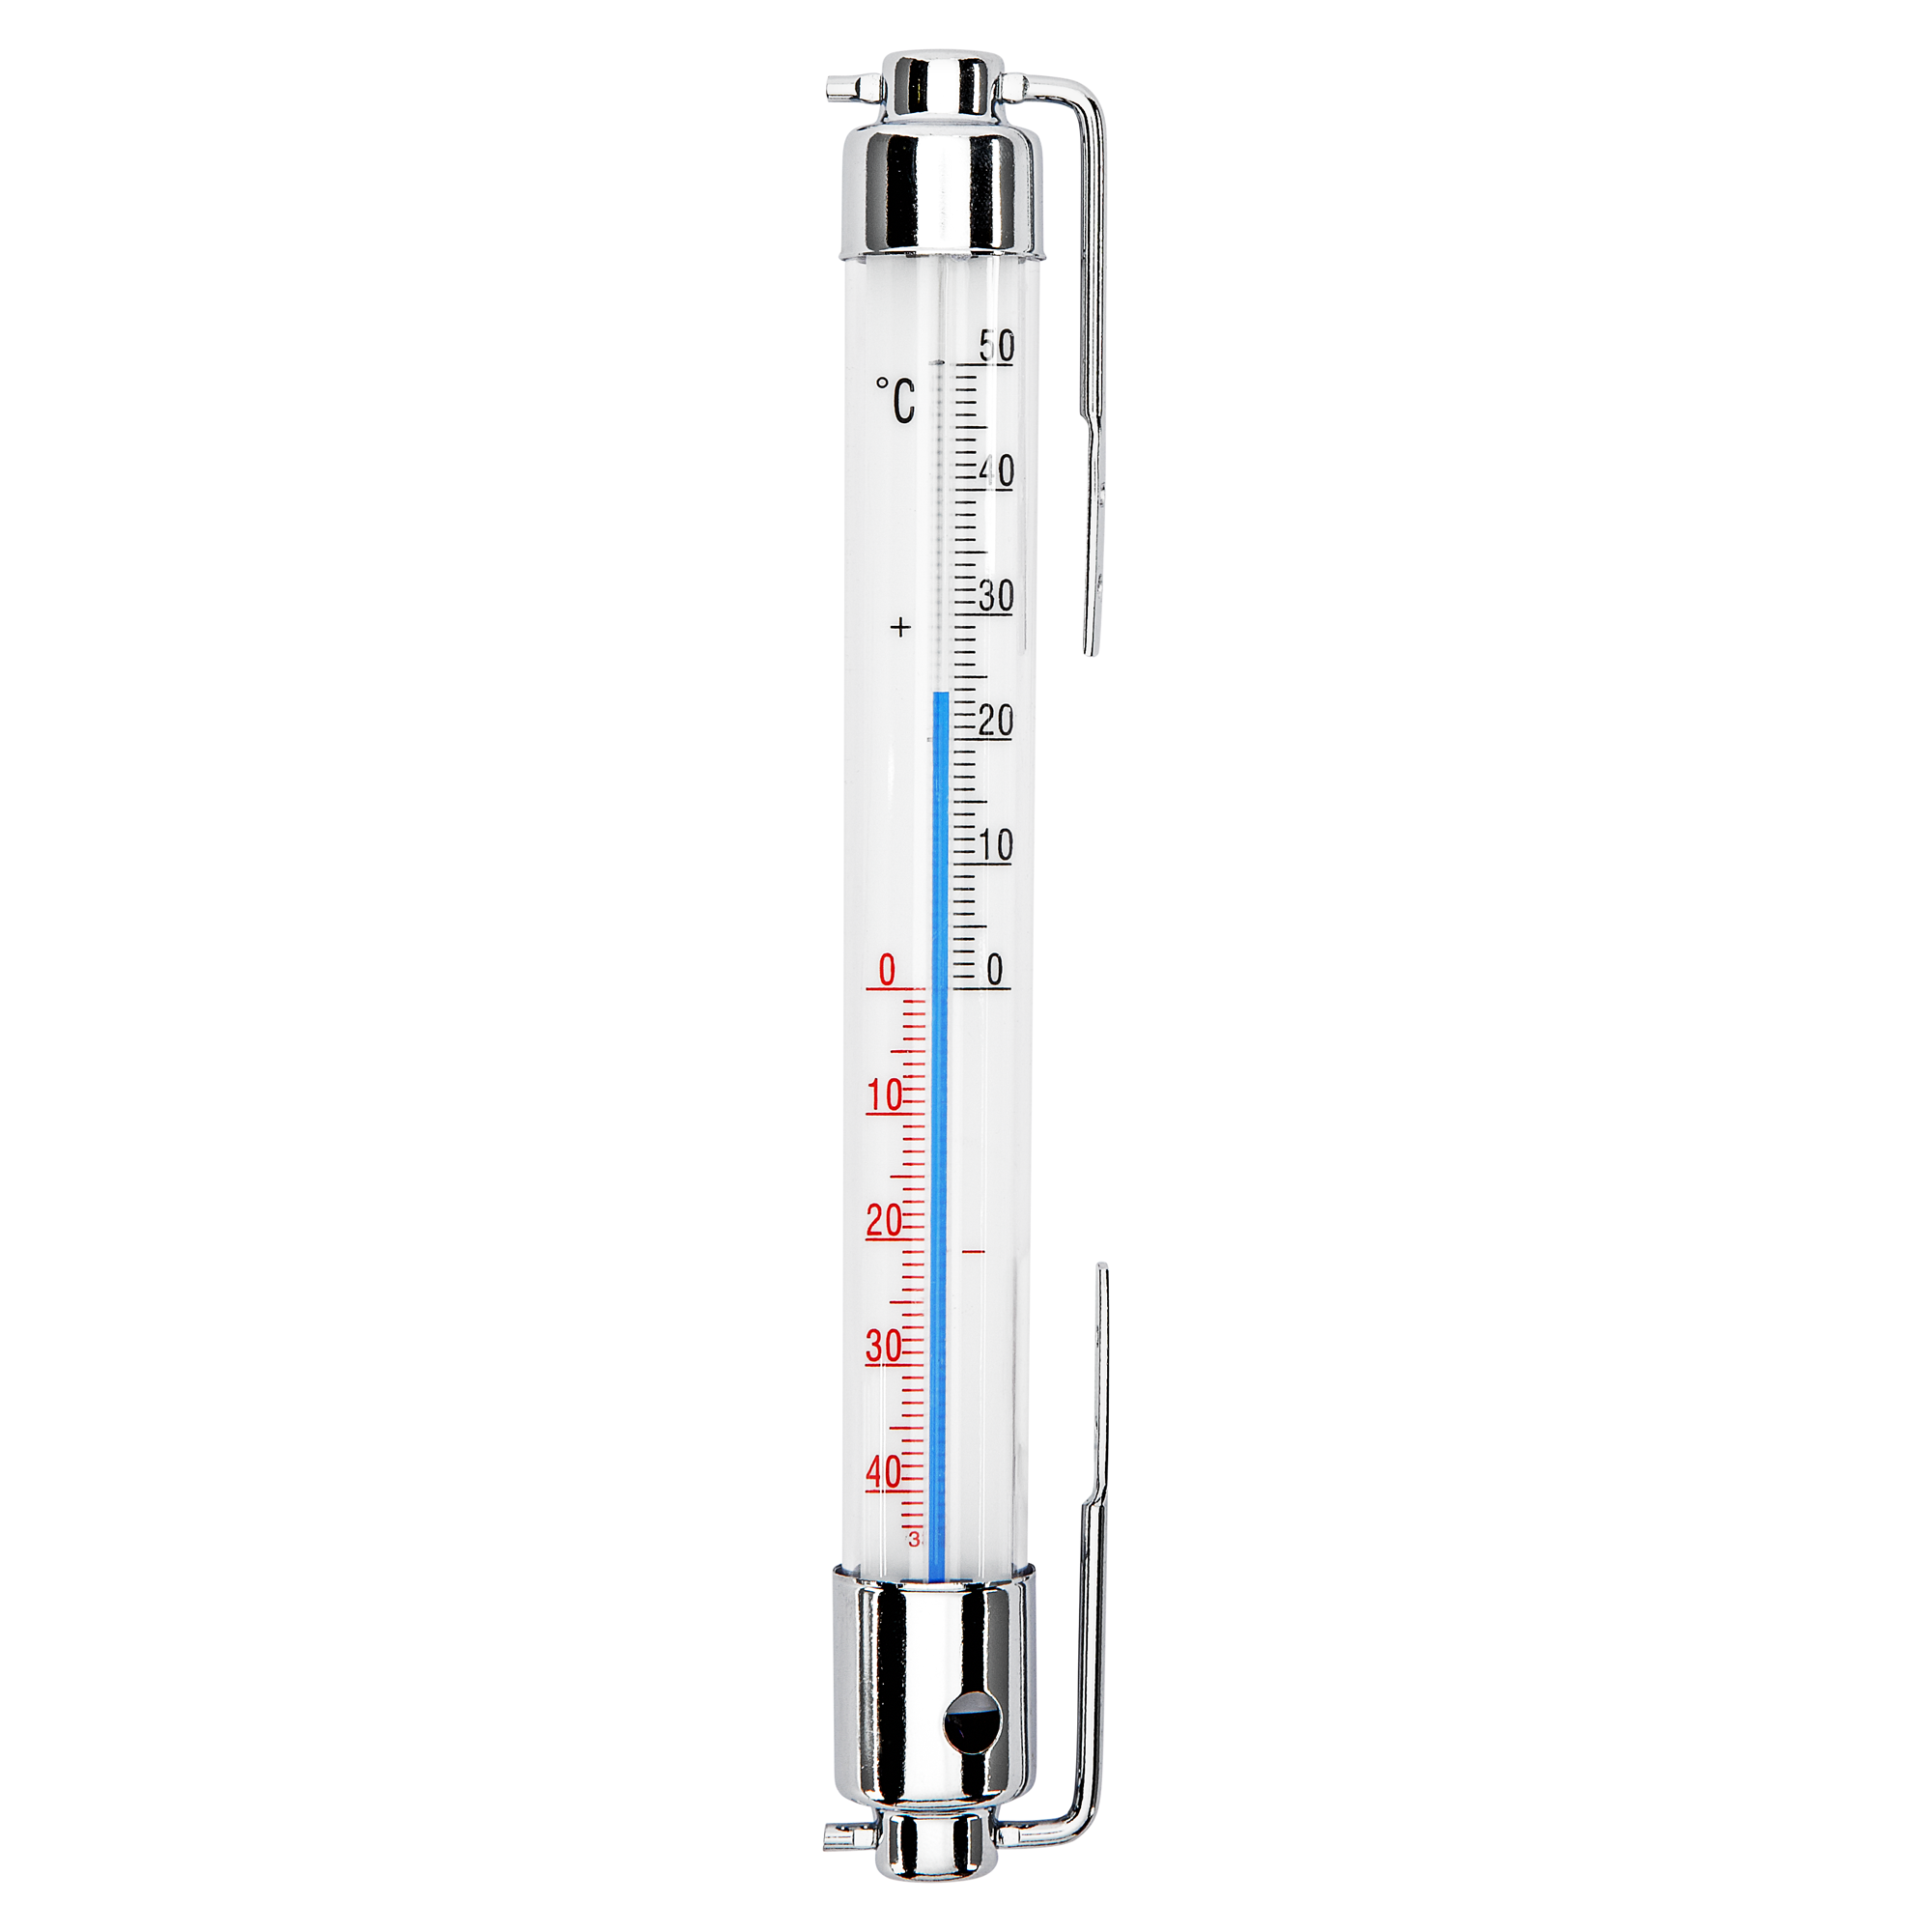 Fensterthermometer Metall, Acrylglas silbern, weiß 2,3 x 2,8 x 20 cm + product picture